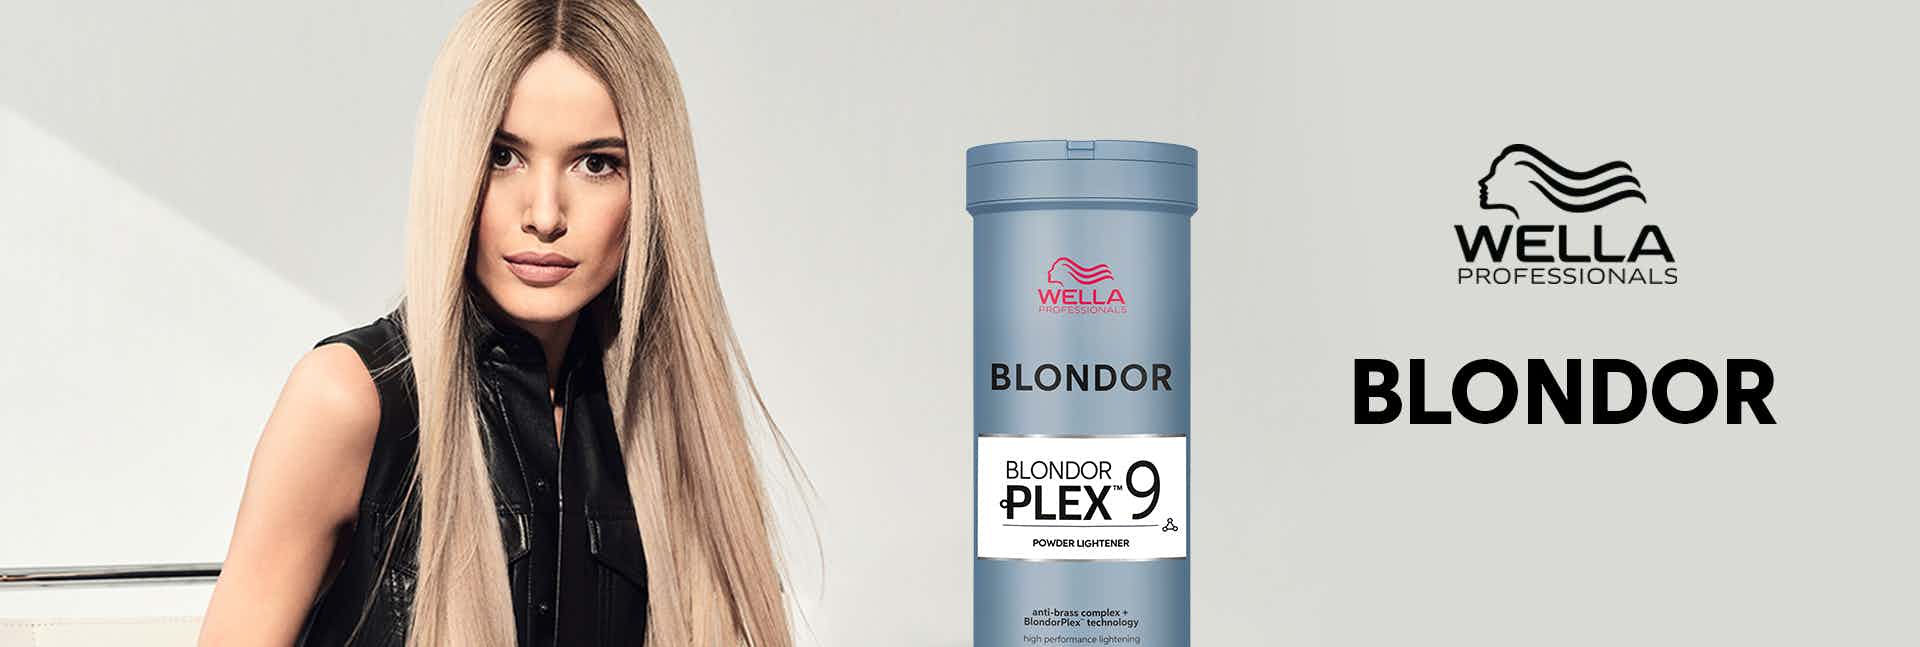 Blondor by Wella Professionals The range of expert lightening solutions that will allow you to achieve your desired lightening service and results